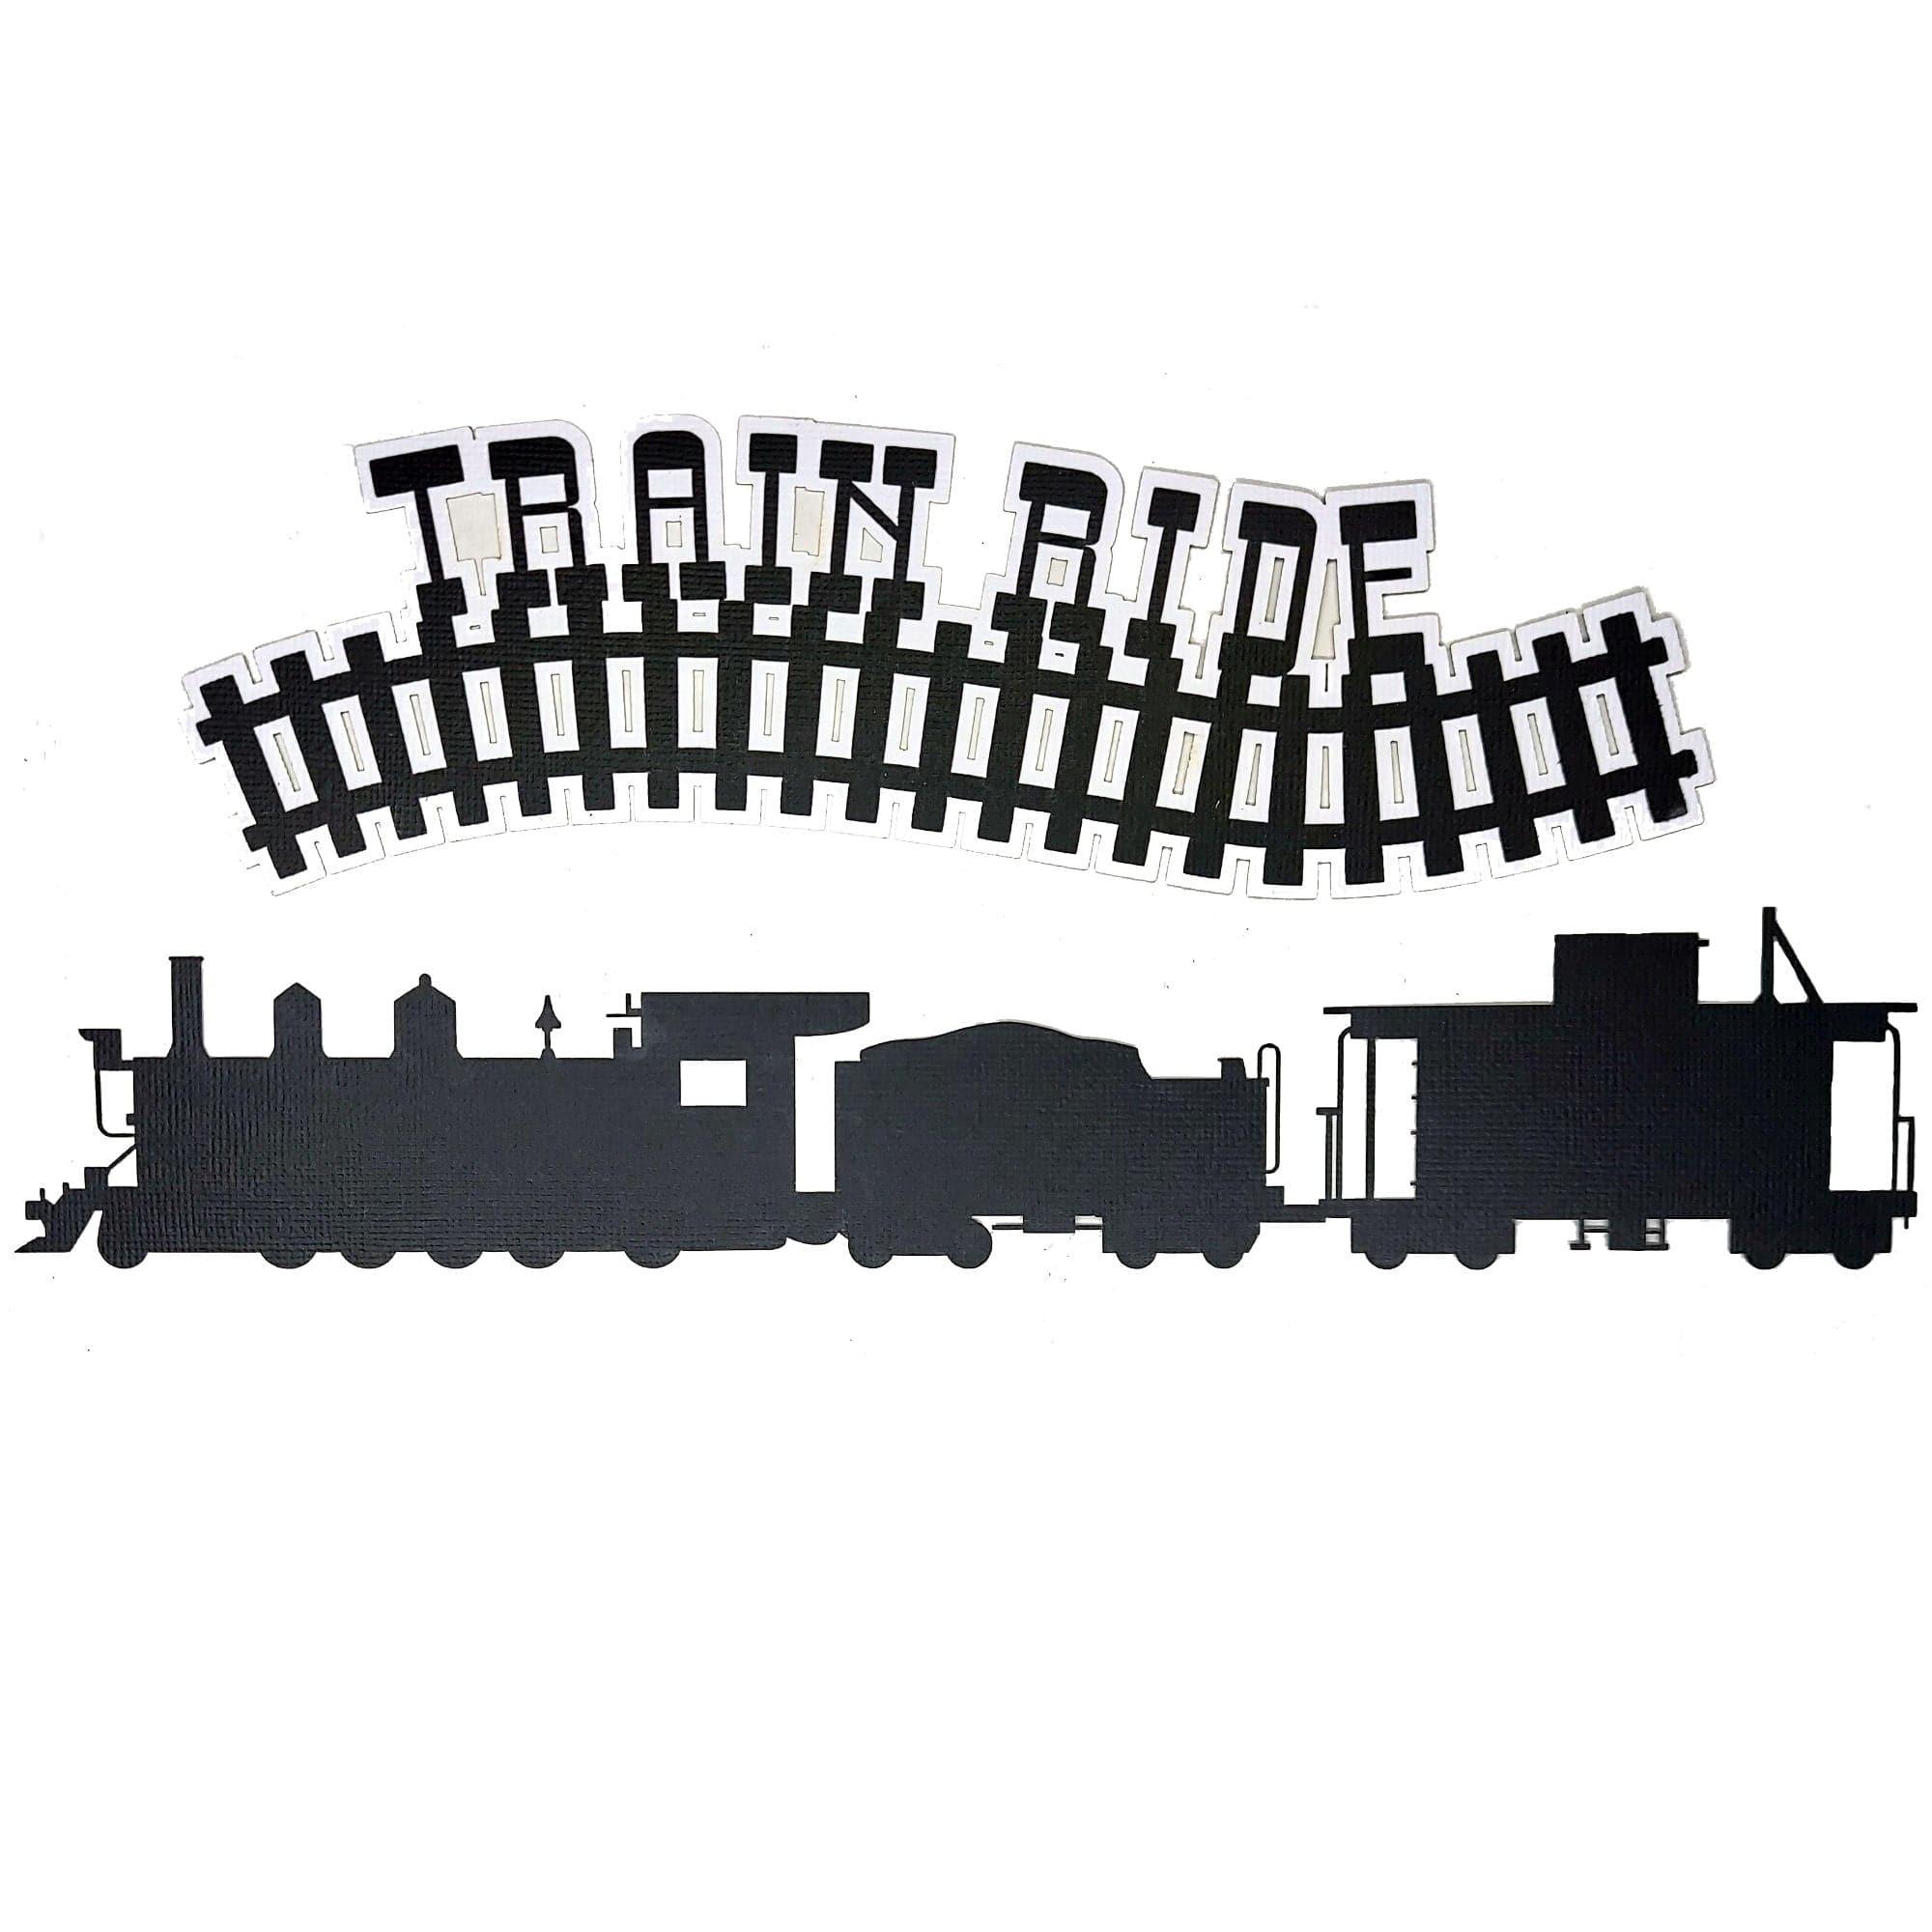 Train Ride Title and Train 4 x 12 (2)-Piece Set Fully-Assembled Laser Cut Scrapbook Embellishment by SSC Laser Designs